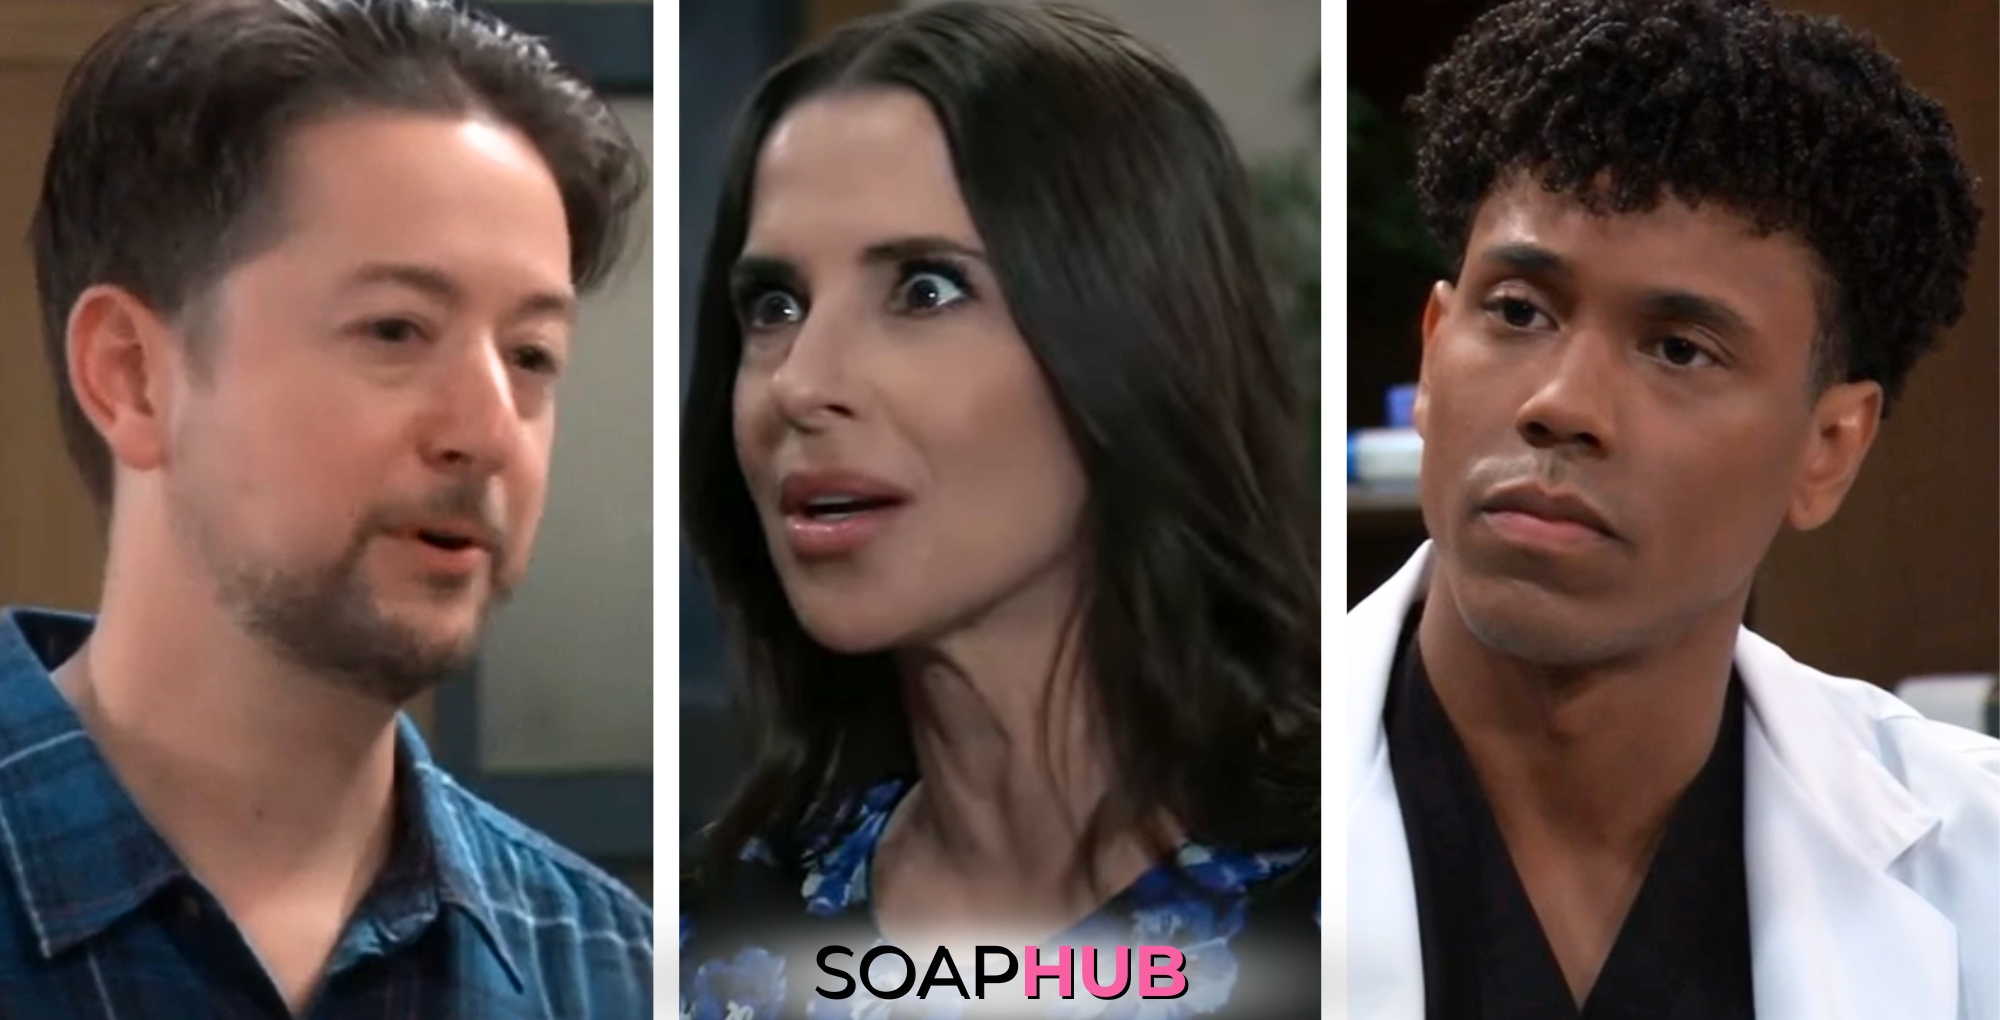 GH Spoilers Weekly Update: Unexpected Ups And Disastrous Downs